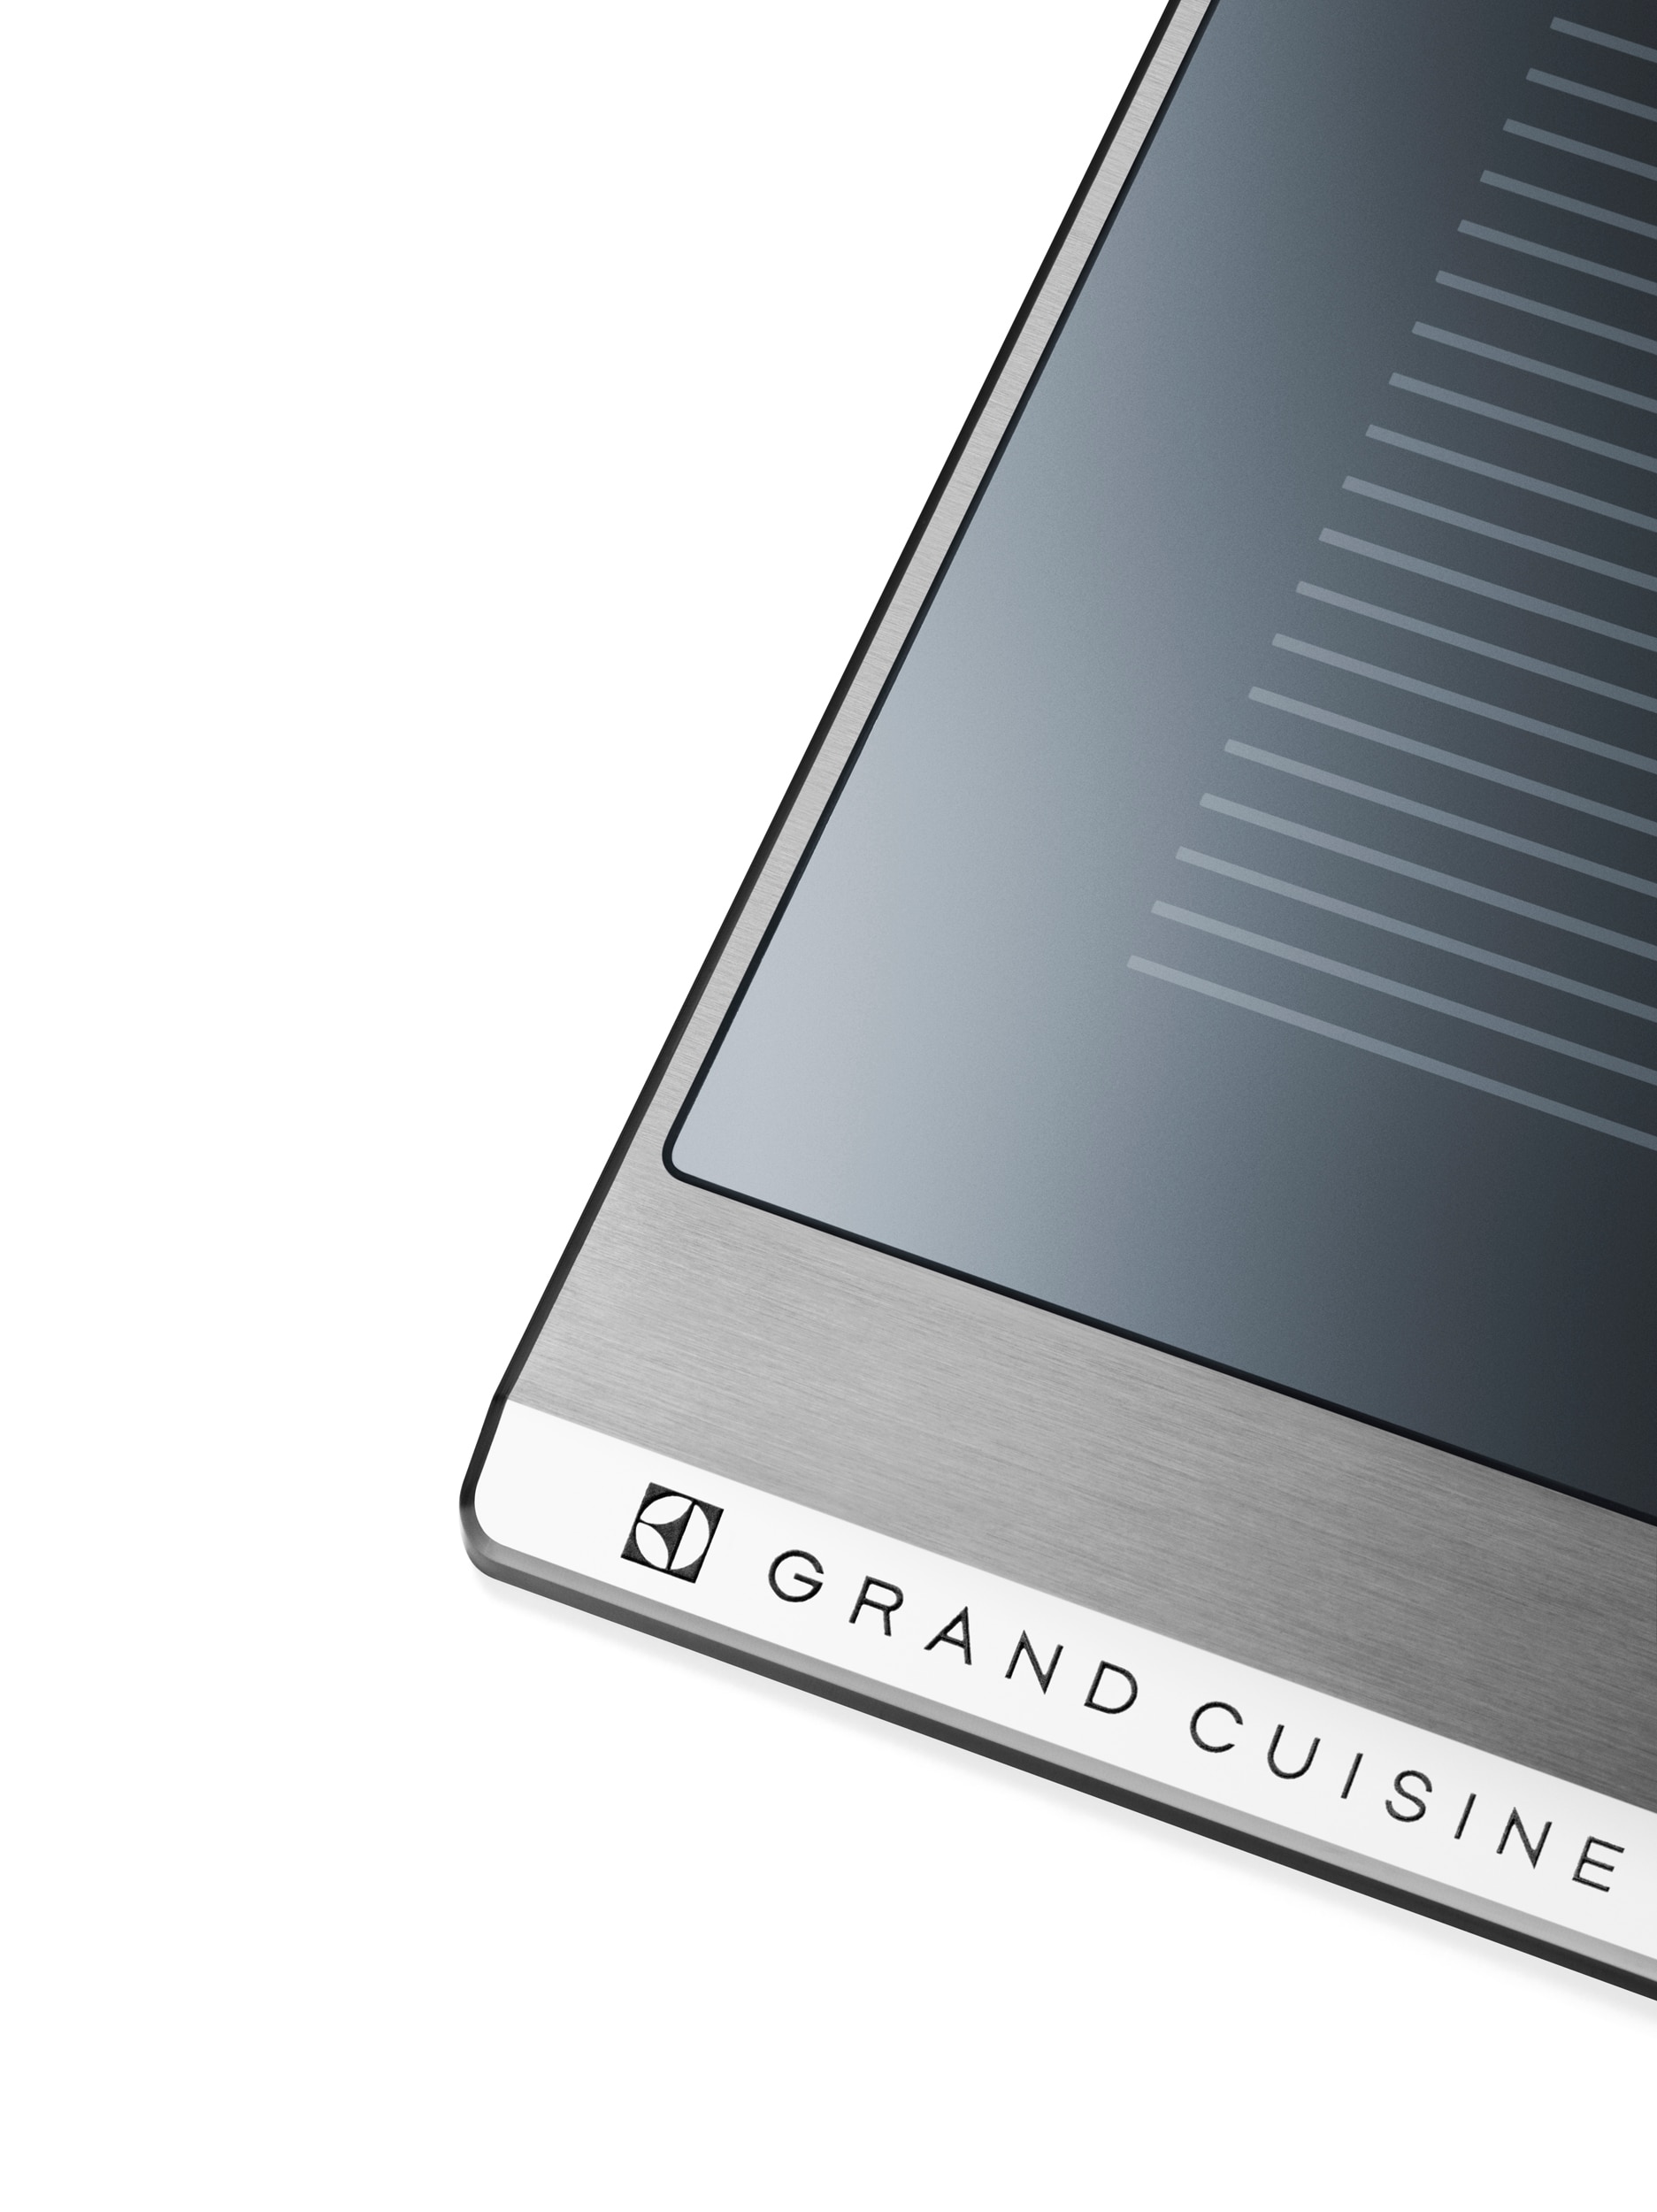 Electrolux Grand Cuisine - Induction Zone